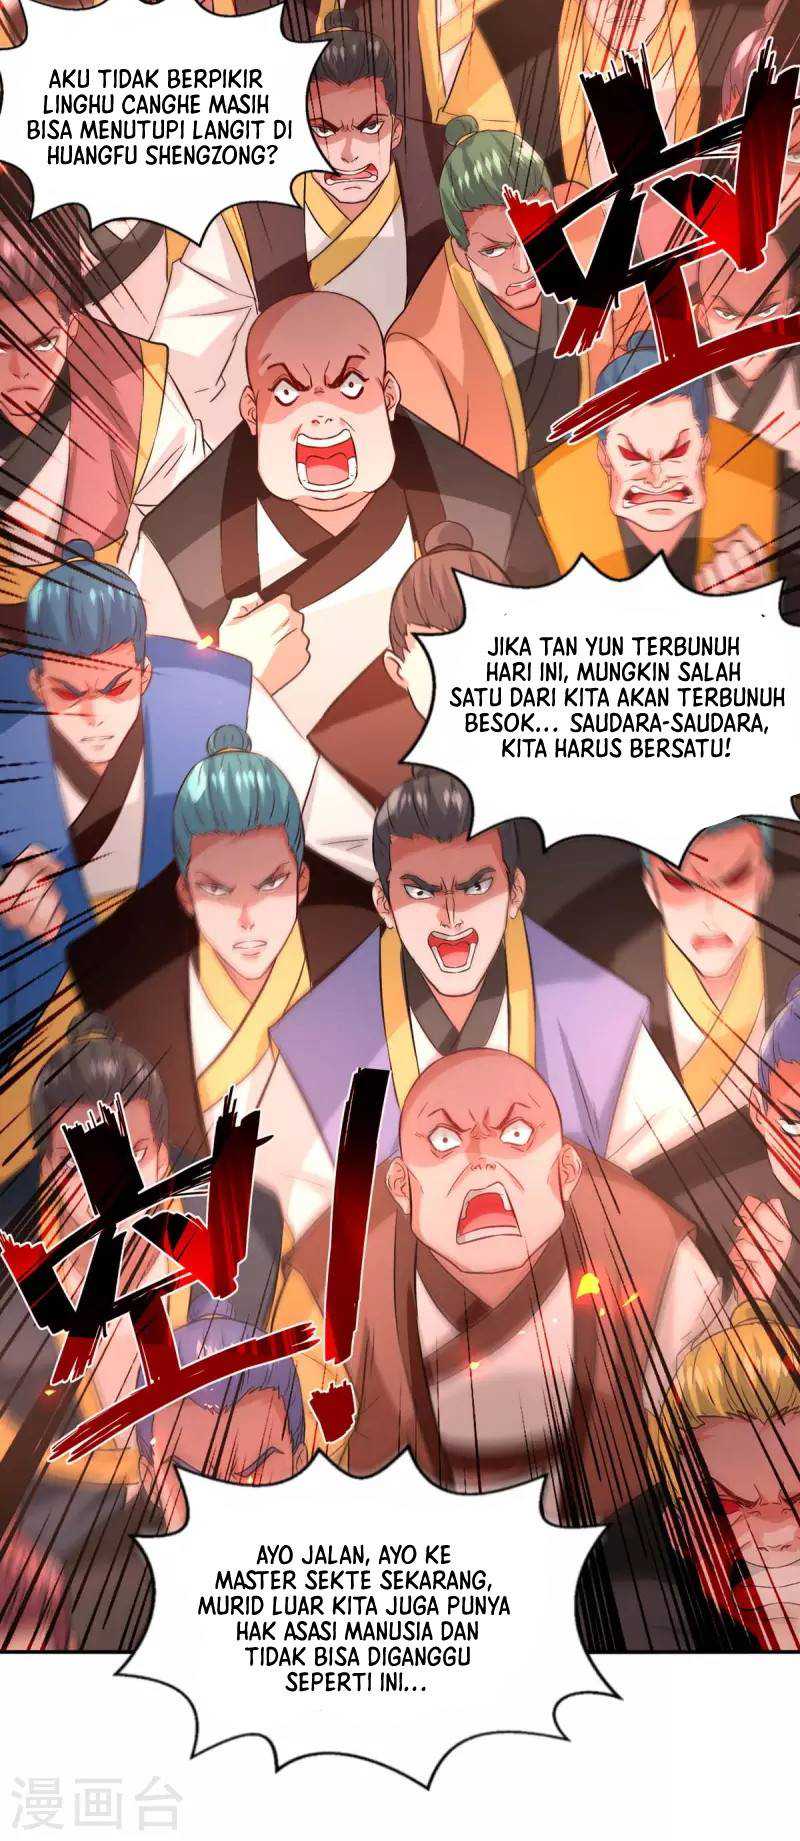 Against The Heaven Supreme (Heaven Guards) Chapter 85 - 169